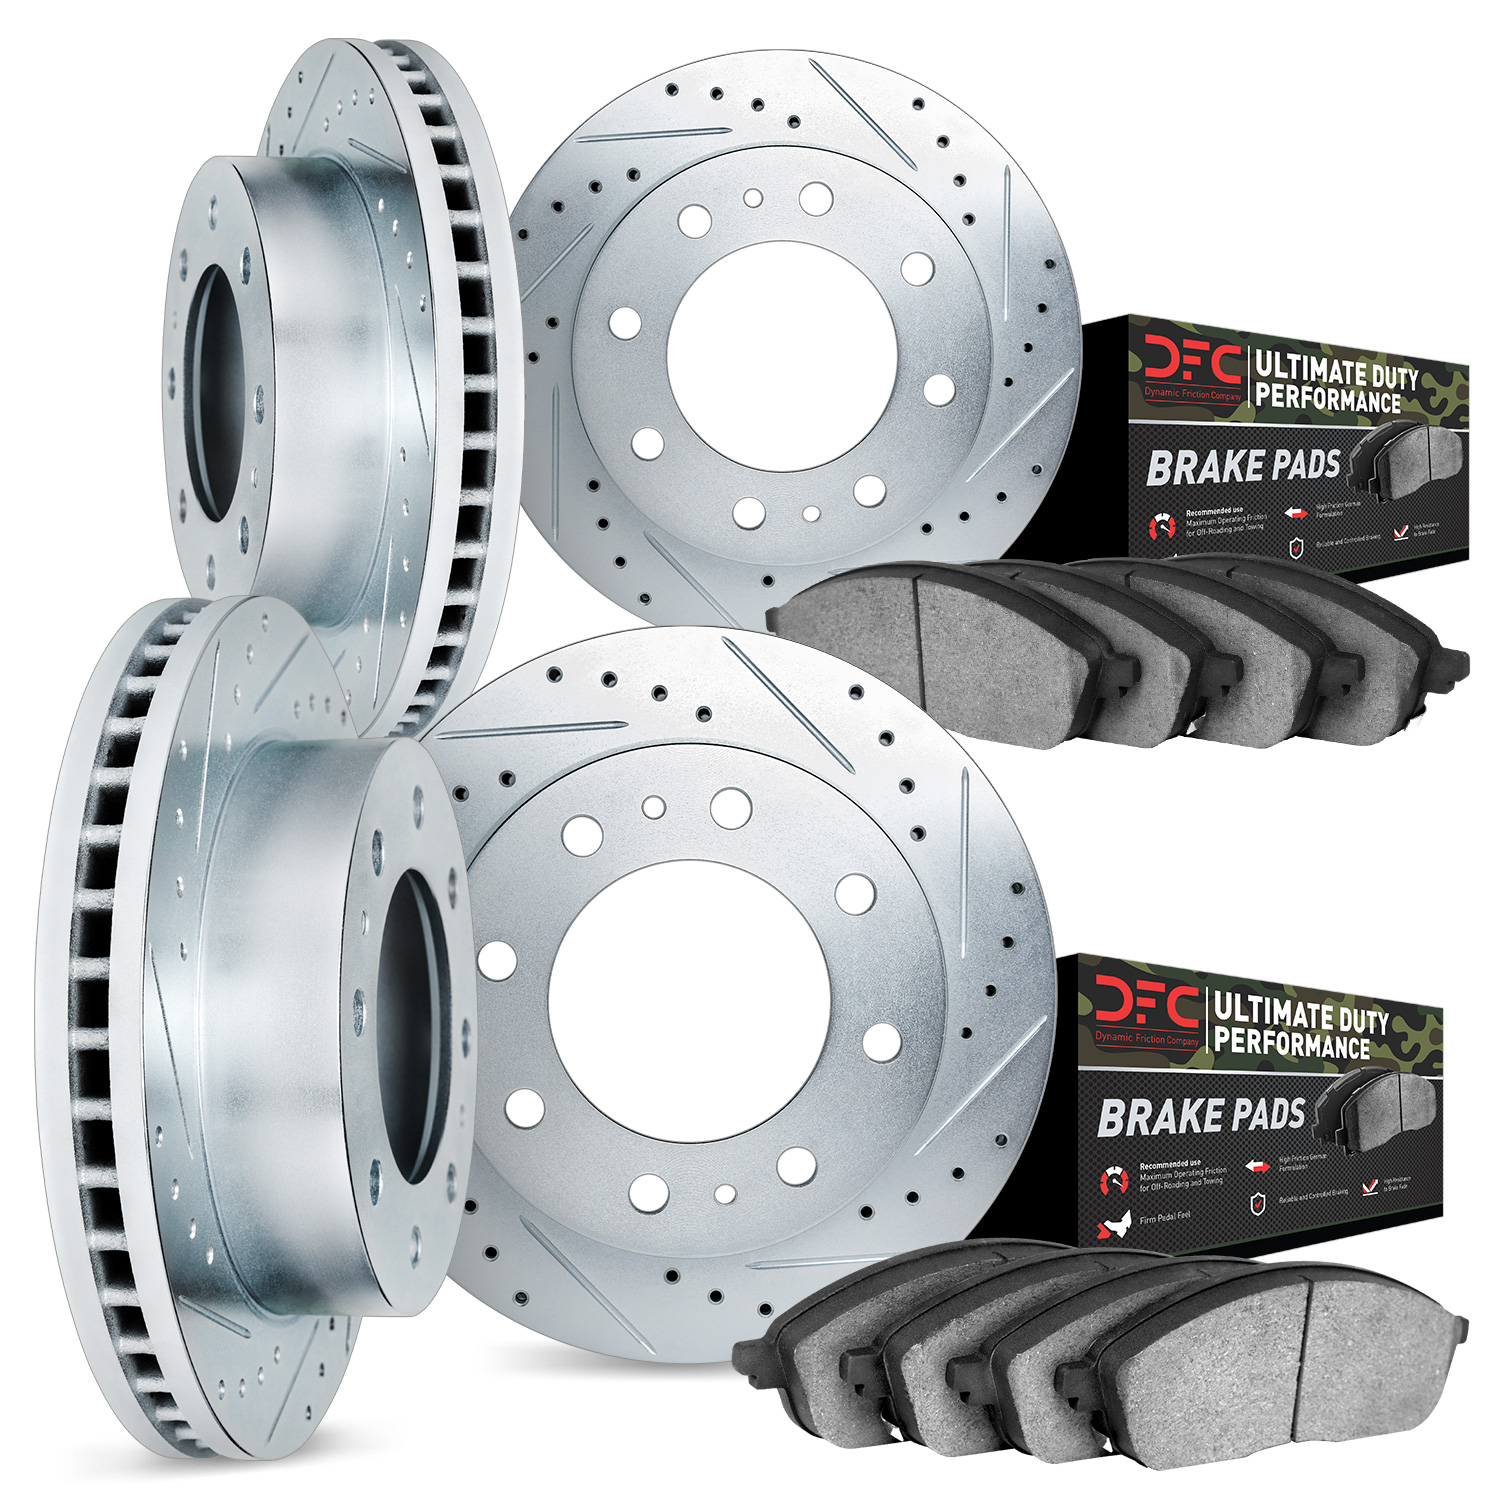 7404-54037 Drilled/Slotted Brake Rotors with Ultimate-Duty Brake Pads Kit [Silver], 2005-2010 Ford/Lincoln/Mercury/Mazda, Positi